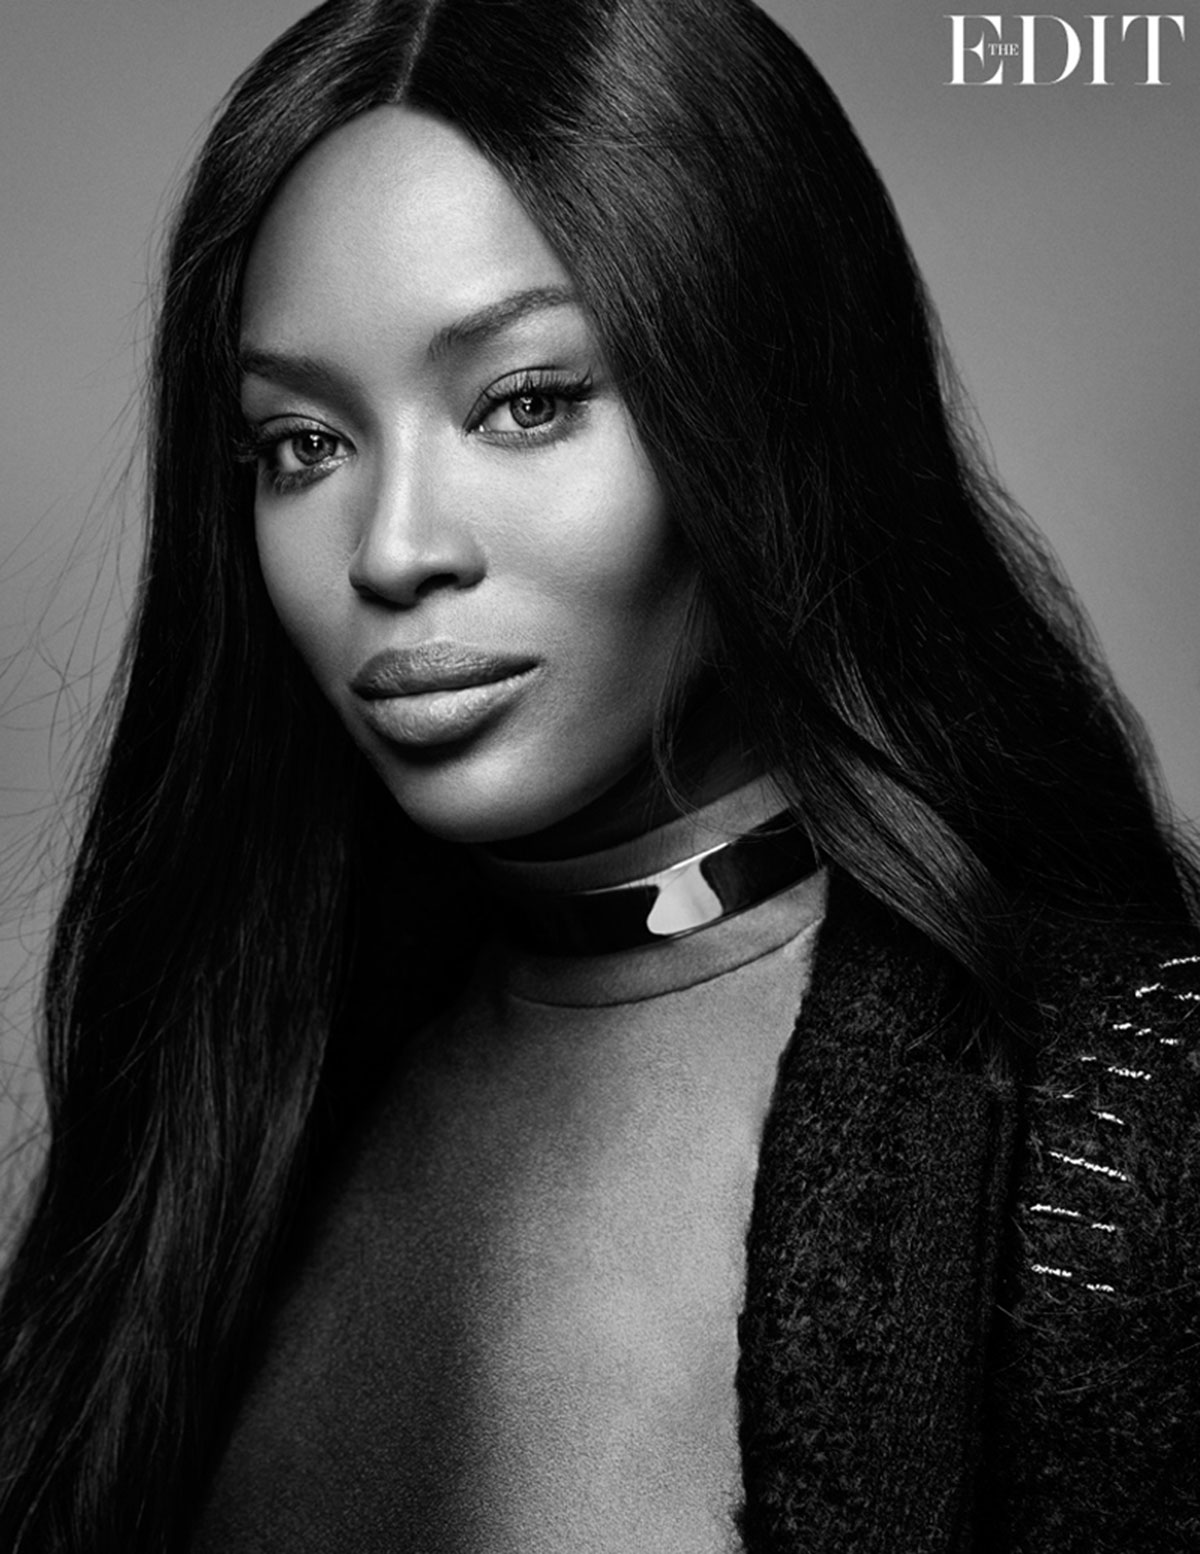 NAOMI CAMPBELL in The Edit Magazine, November 2014 Issue – HawtCelebs